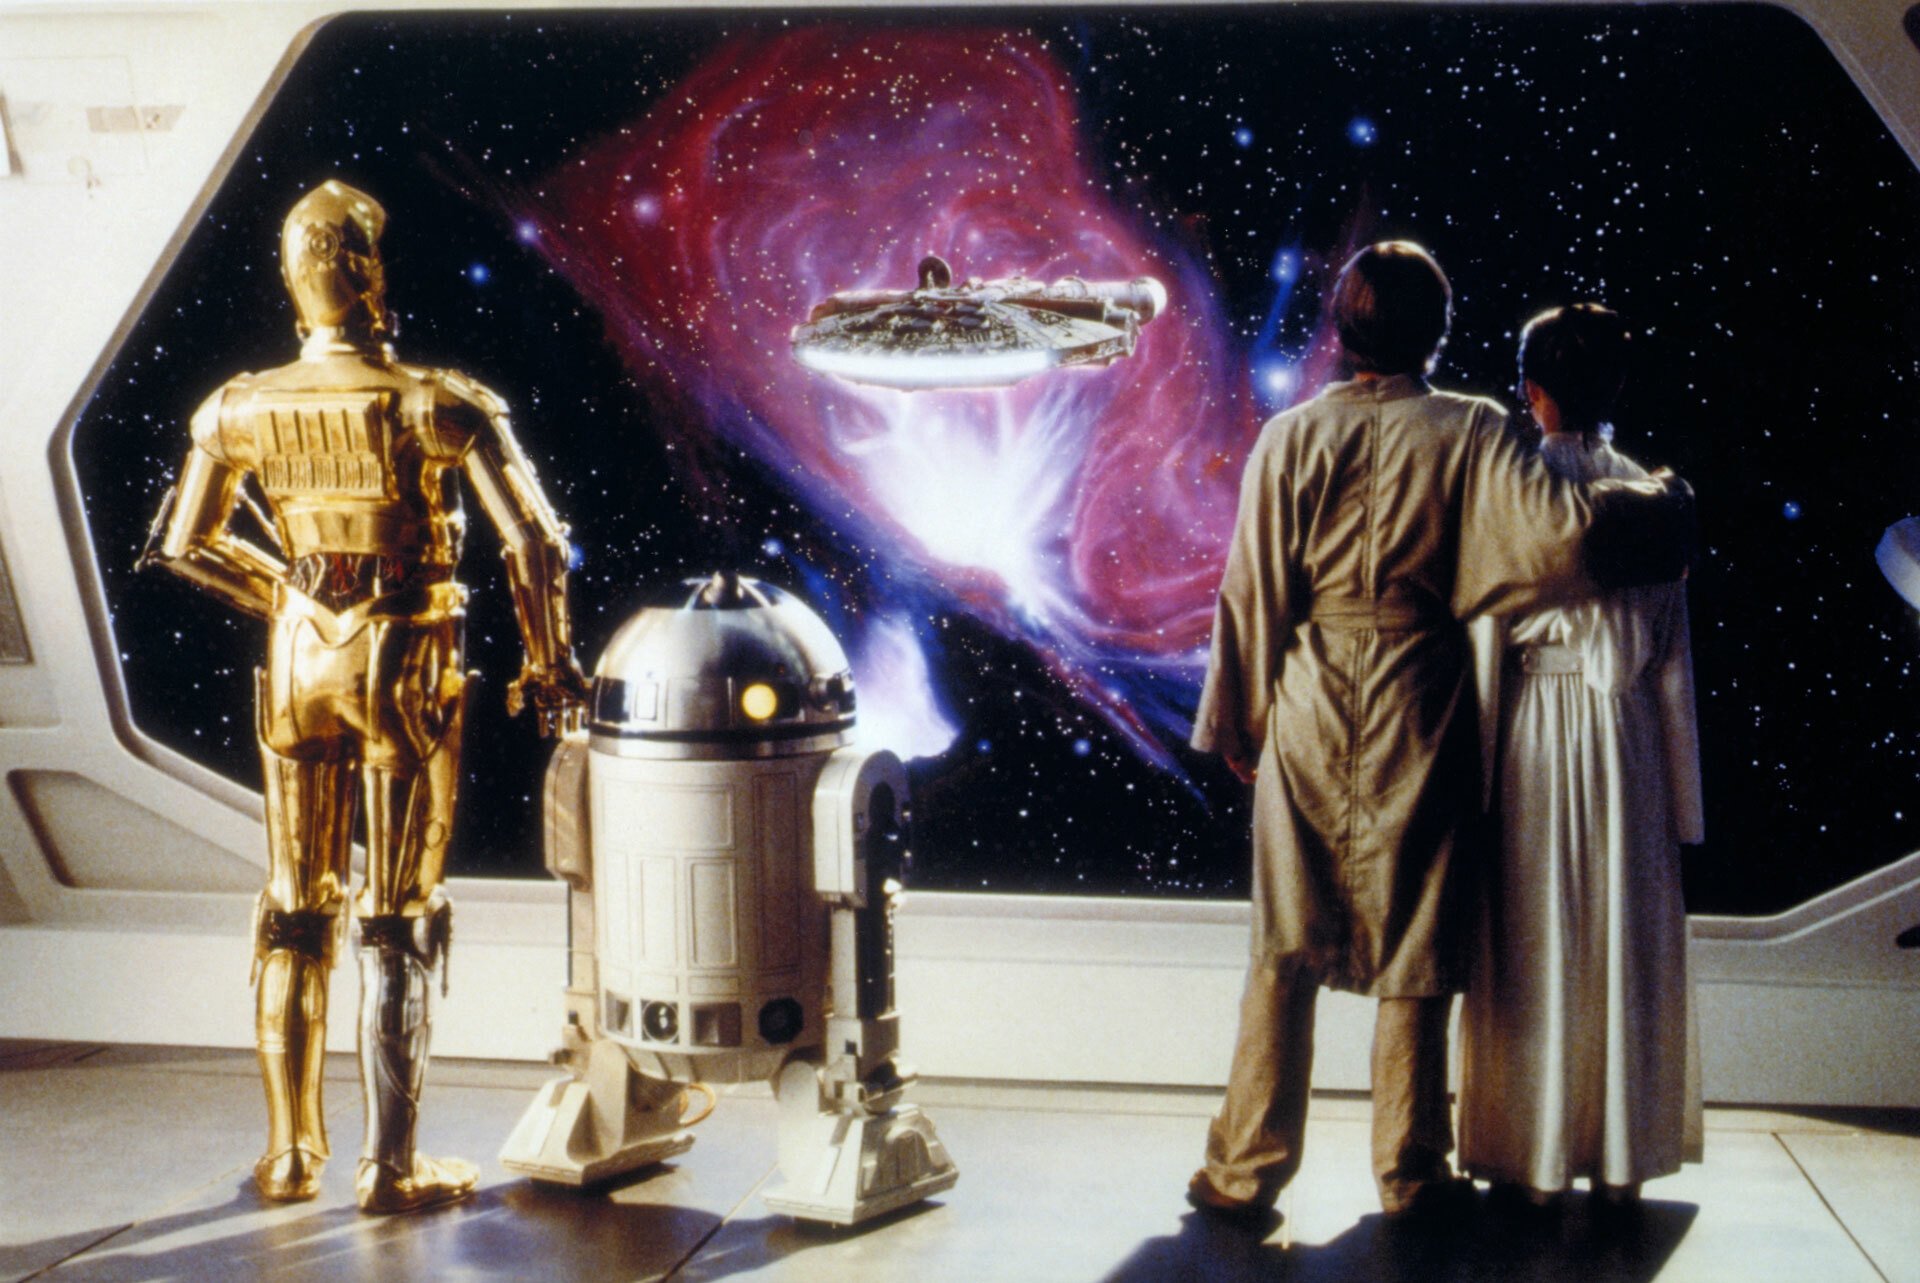 A still from the movie "Star Wars: The Empire Strikes Back." C-3P0, R2-D2, Luke Skywalker, and Princess Leia stand facing a window into space where they see the Millennium Falcon in flight.